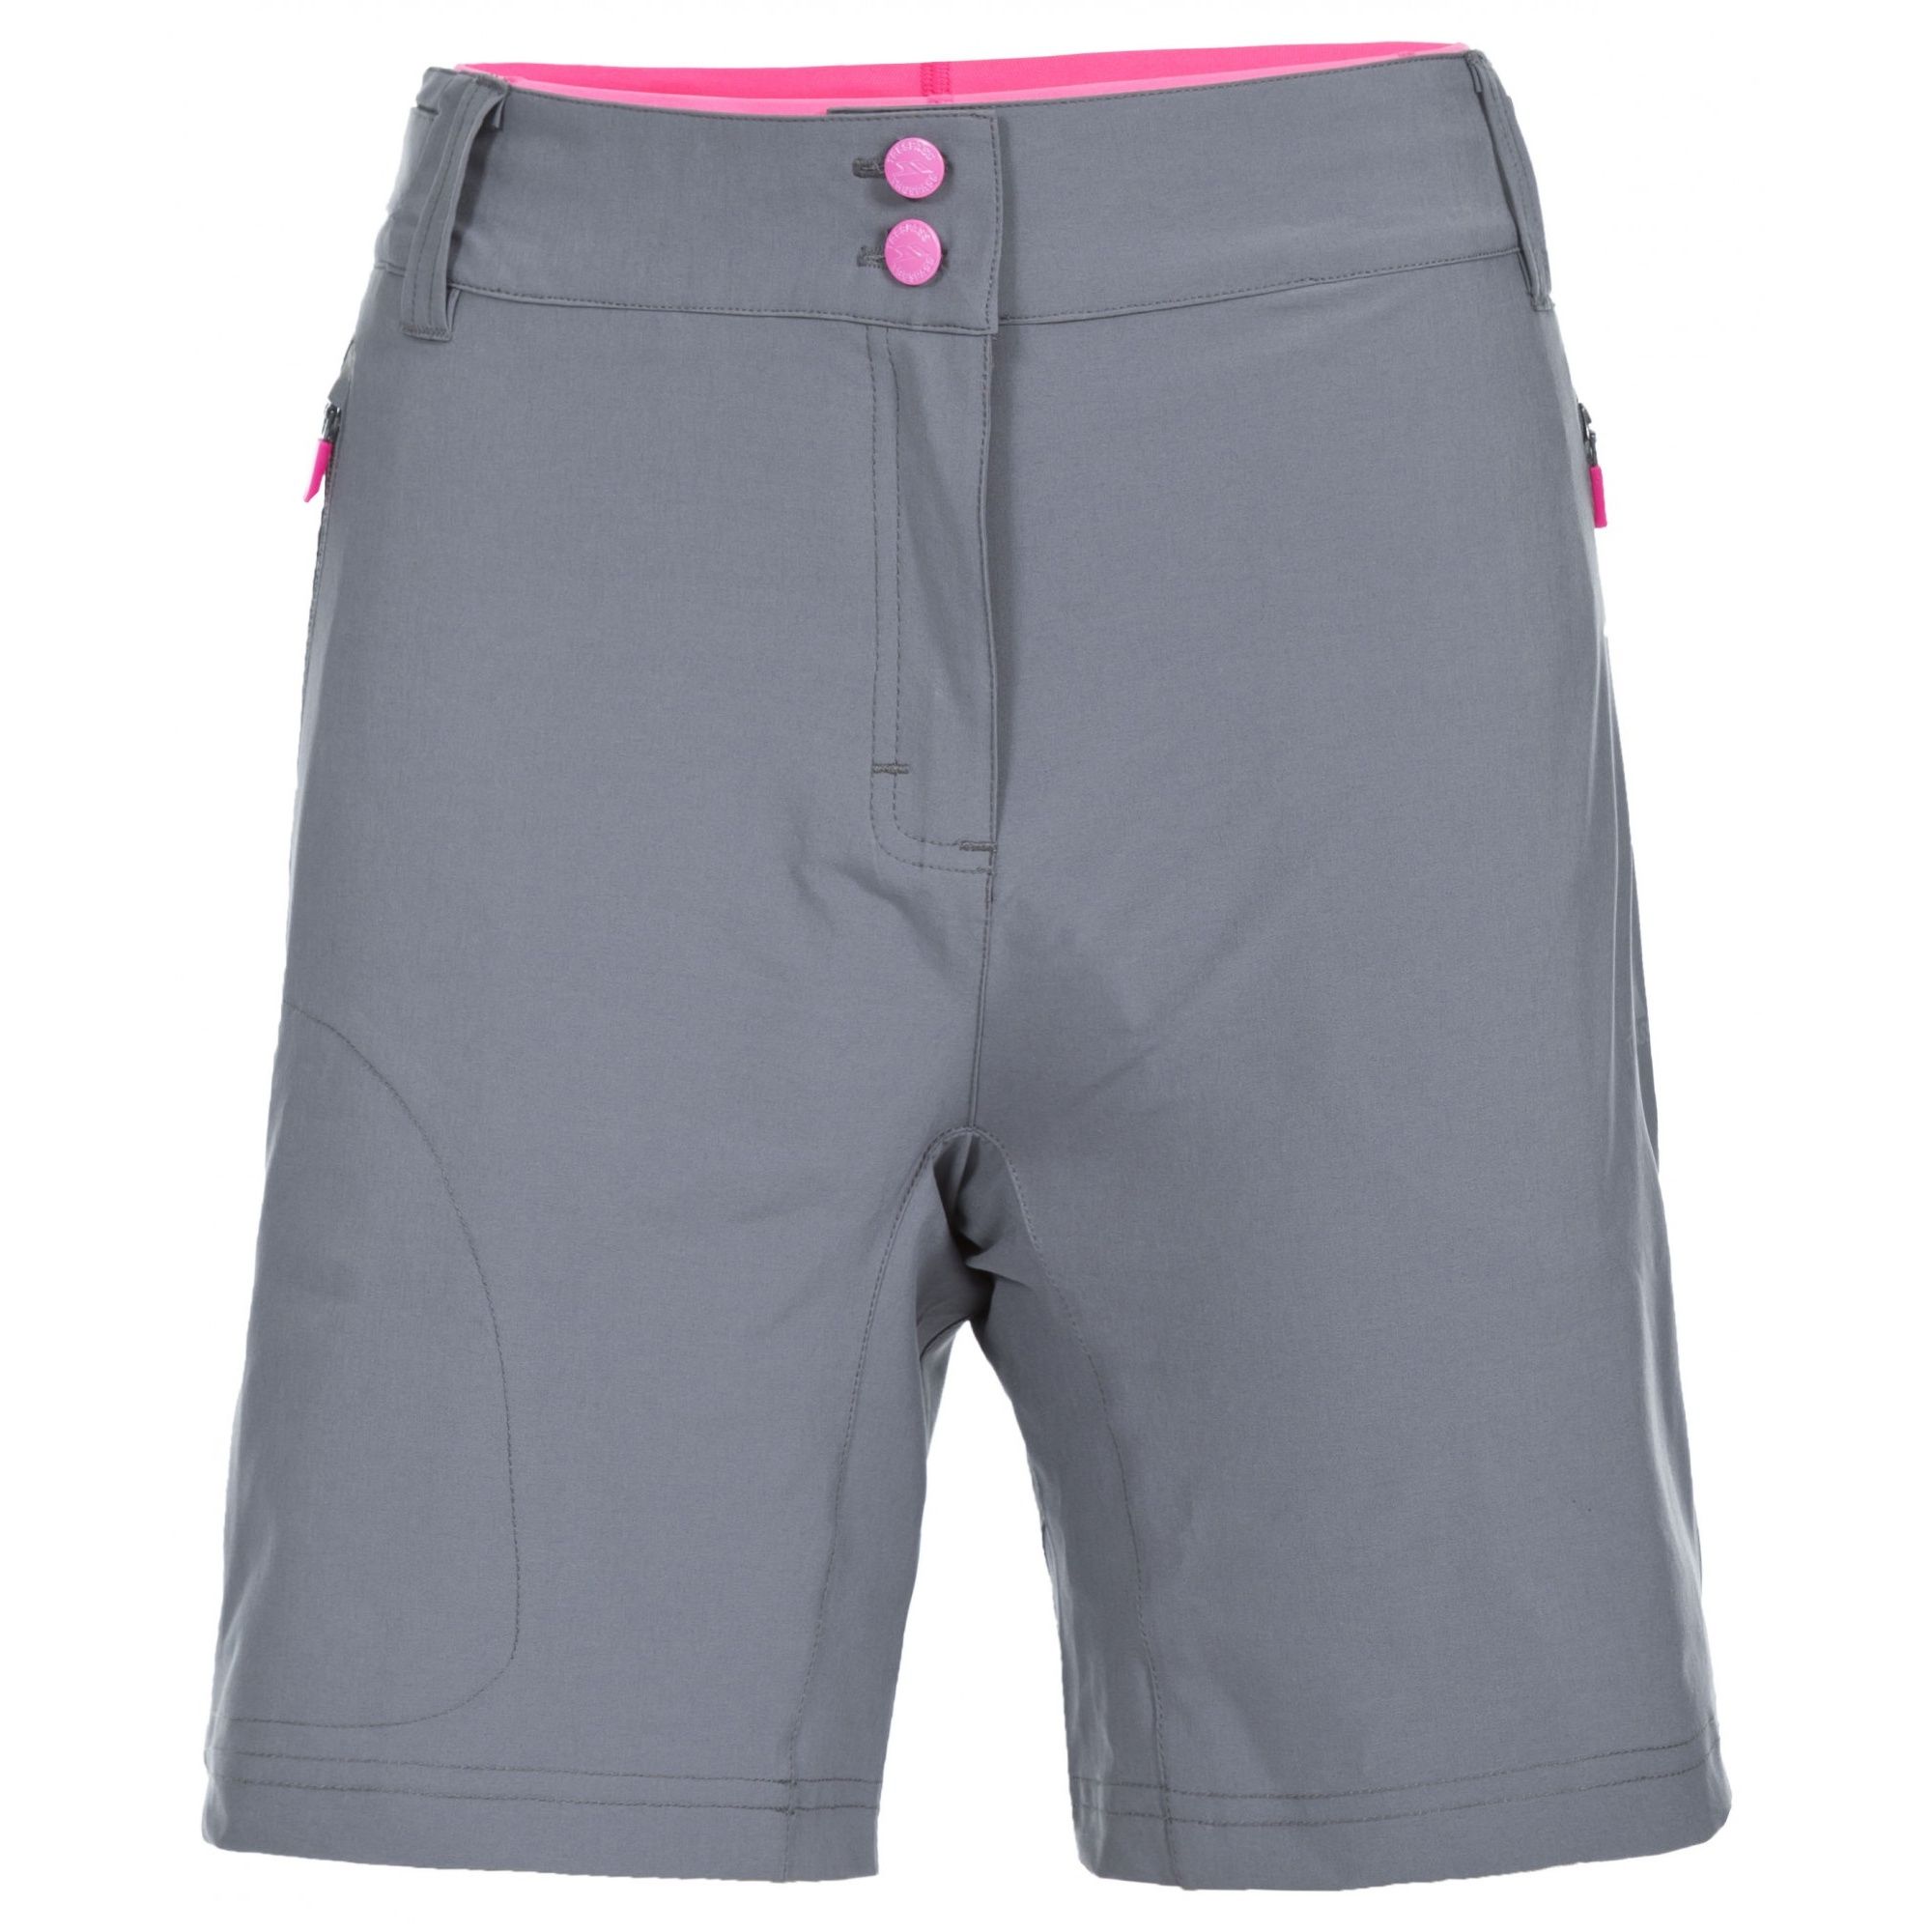 Removable padded inner cycle short. Flat waist with side touch fastening tab adjuster. 3 zip pockets. Reflective trims and prints. Coolmax. Quick dry. Woven outer, knitted inner. 90% Polyester/10% Elastane. Trespass Womens Waist Sizing (approx): XS/8 - 25in/66cm, S/10 - 28in/71cm, M/12 - 30in/76cm, L/14 - 32in/81cm, XL/16 - 34in/86cm, XXL/18 - 36in/91.5cm.